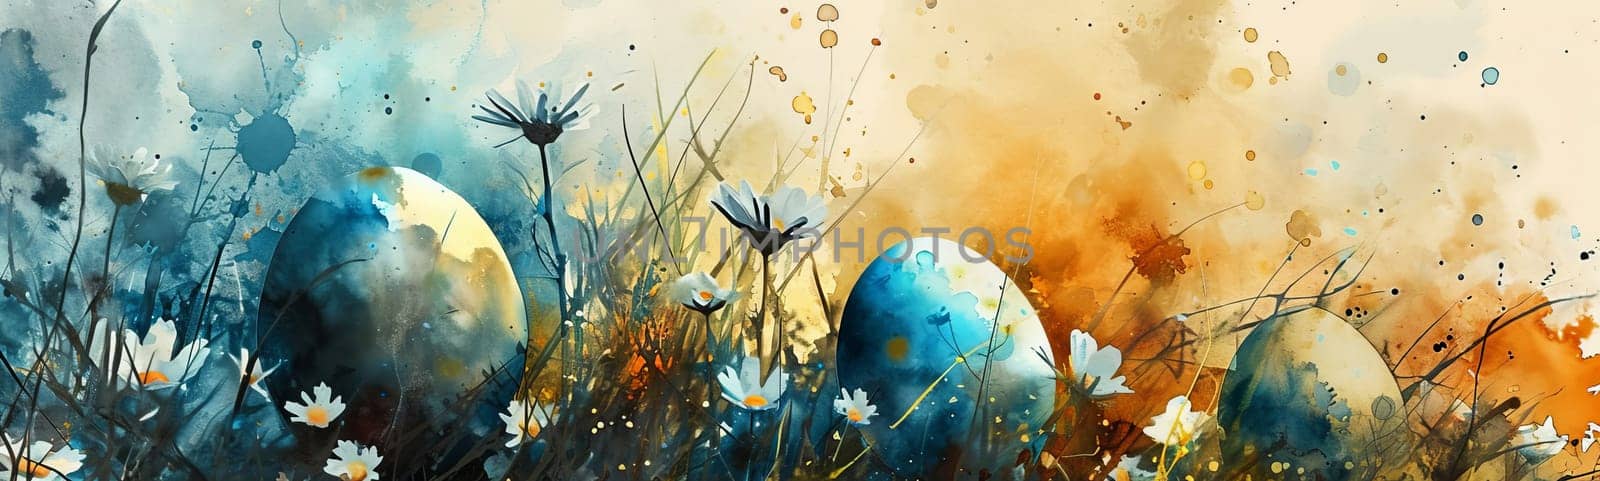 An image with a watercolor style of Easter eggs in a meadow among grass and blooming spring flowers.